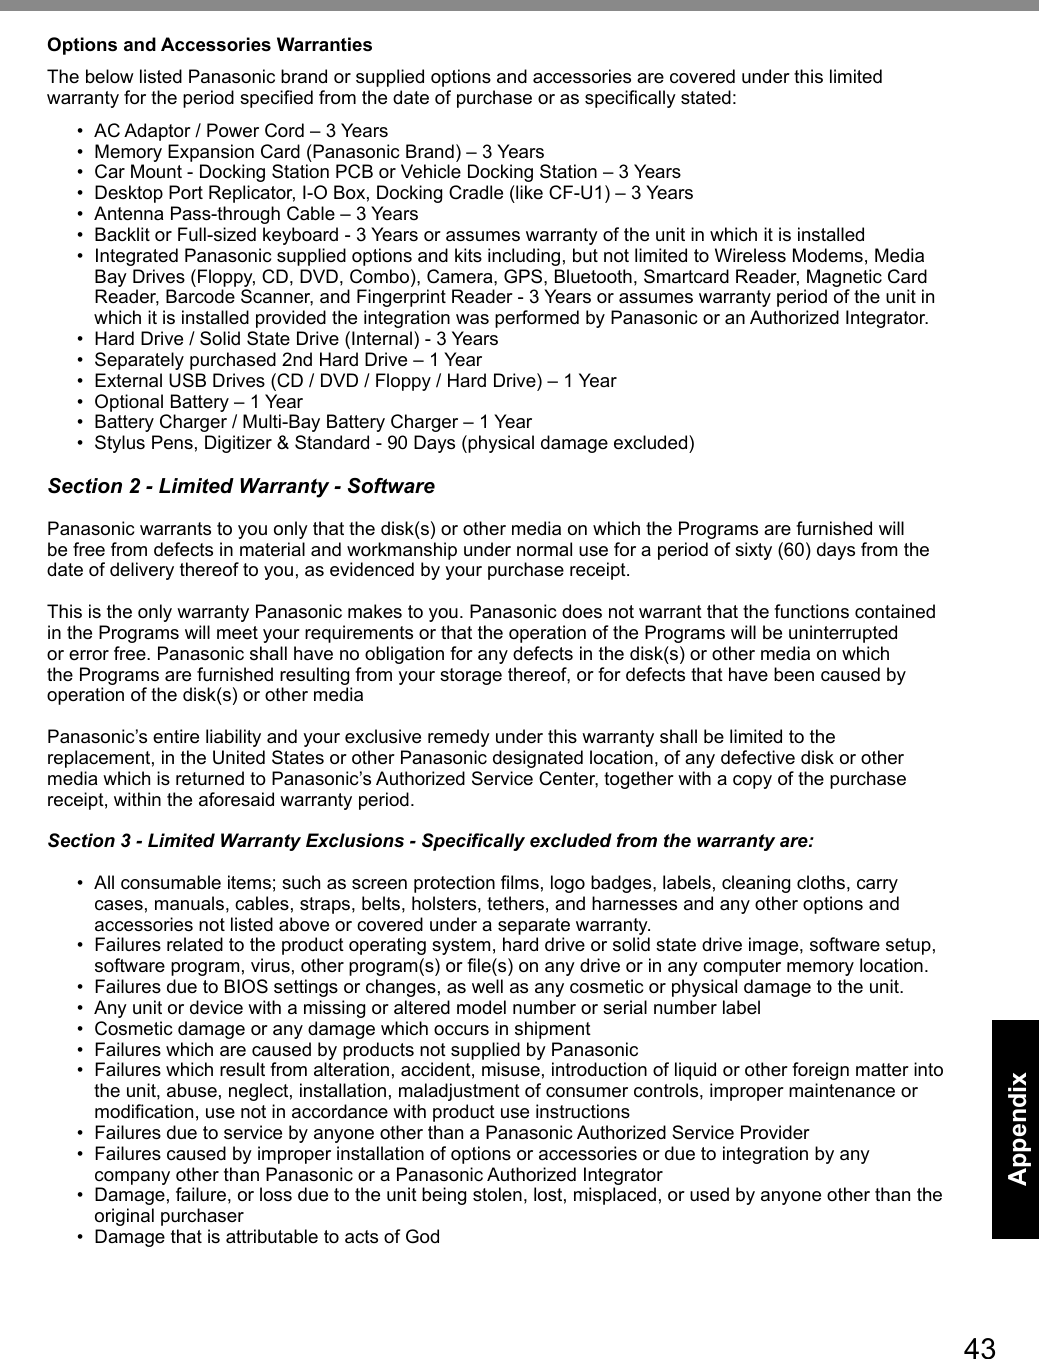 43AppendixOptions and Accessories WarrantiesThe below listed Panasonic brand or supplied options and accessories are covered under this limited warranty for the period specified from the date of purchase or as specifically stated:•  AC Adaptor / Power Cord – 3 Years•  Memory Expansion Card (Panasonic Brand) – 3 Years •  Car Mount - Docking Station PCB or Vehicle Docking Station – 3 Years•  Desktop Port Replicator, I-O Box, Docking Cradle (like CF-U1) – 3 Years•  Antenna Pass-through Cable – 3 Years•  Backlit or Full-sized keyboard - 3 Years or assumes warranty of the unit in which it is installed•  Integrated Panasonic supplied options and kits including, but not limited to Wireless Modems, Media Bay Drives (Floppy, CD, DVD, Combo), Camera, GPS, Bluetooth, Smartcard Reader, Magnetic Card Reader, Barcode Scanner, and Fingerprint Reader - 3 Years or assumes warranty period of the unit in which it is installed provided the integration was performed by Panasonic or an Authorized Integrator.•  Hard Drive / Solid State Drive (Internal) - 3 Years•  Separately purchased 2nd Hard Drive – 1 Year•  External USB Drives (CD / DVD / Floppy / Hard Drive) – 1 Year•  Optional Battery – 1 Year•  Battery Charger / Multi-Bay Battery Charger – 1 Year•  Stylus Pens, Digitizer &amp; Standard - 90 Days (physical damage excluded)Section 2 - Limited Warranty - SoftwarePanasonic warrants to you only that the disk(s) or other media on which the Programs are furnished will be free from defects in material and workmanship under normal use for a period of sixty (60) days from the date of delivery thereof to you, as evidenced by your purchase receipt.This is the only warranty Panasonic makes to you. Panasonic does not warrant that the functions contained in the Programs will meet your requirements or that the operation of the Programs will be uninterrupted or error free. Panasonic shall have no obligation for any defects in the disk(s) or other media on which the Programs are furnished resulting from your storage thereof, or for defects that have been caused by operation of the disk(s) or other mediaPanasonic’s entire liability and your exclusive remedy under this warranty shall be limited to the replacement, in the United States or other Panasonic designated location, of any defective disk or other media which is returned to Panasonic’s Authorized Service Center, together with a copy of the purchase receipt, within the aforesaid warranty period.Section 3 - Limited Warranty Exclusions - Specifically excluded from the warranty are:•  All consumable items; such as screen protection films, logo badges, labels, cleaning cloths, carry cases, manuals, cables, straps, belts, holsters, tethers, and harnesses and any other options and accessories not listed above or covered under a separate warranty.•  Failures related to the product operating system, hard drive or solid state drive image, software setup, software program, virus, other program(s) or file(s) on any drive or in any computer memory location. •  Failures due to BIOS settings or changes, as well as any cosmetic or physical damage to the unit. •  Any unit or device with a missing or altered model number or serial number label•  Cosmetic damage or any damage which occurs in shipment•  Failures which are caused by products not supplied by Panasonic •  Failures which result from alteration, accident, misuse, introduction of liquid or other foreign matter into the unit, abuse, neglect, installation, maladjustment of consumer controls, improper maintenance or modification, use not in accordance with product use instructions •  Failures due to service by anyone other than a Panasonic Authorized Service Provider•  Failures caused by improper installation of options or accessories or due to integration by any company other than Panasonic or a Panasonic Authorized Integrator•  Damage, failure, or loss due to the unit being stolen, lost, misplaced, or used by anyone other than the original purchaser•  Damage that is attributable to acts of God